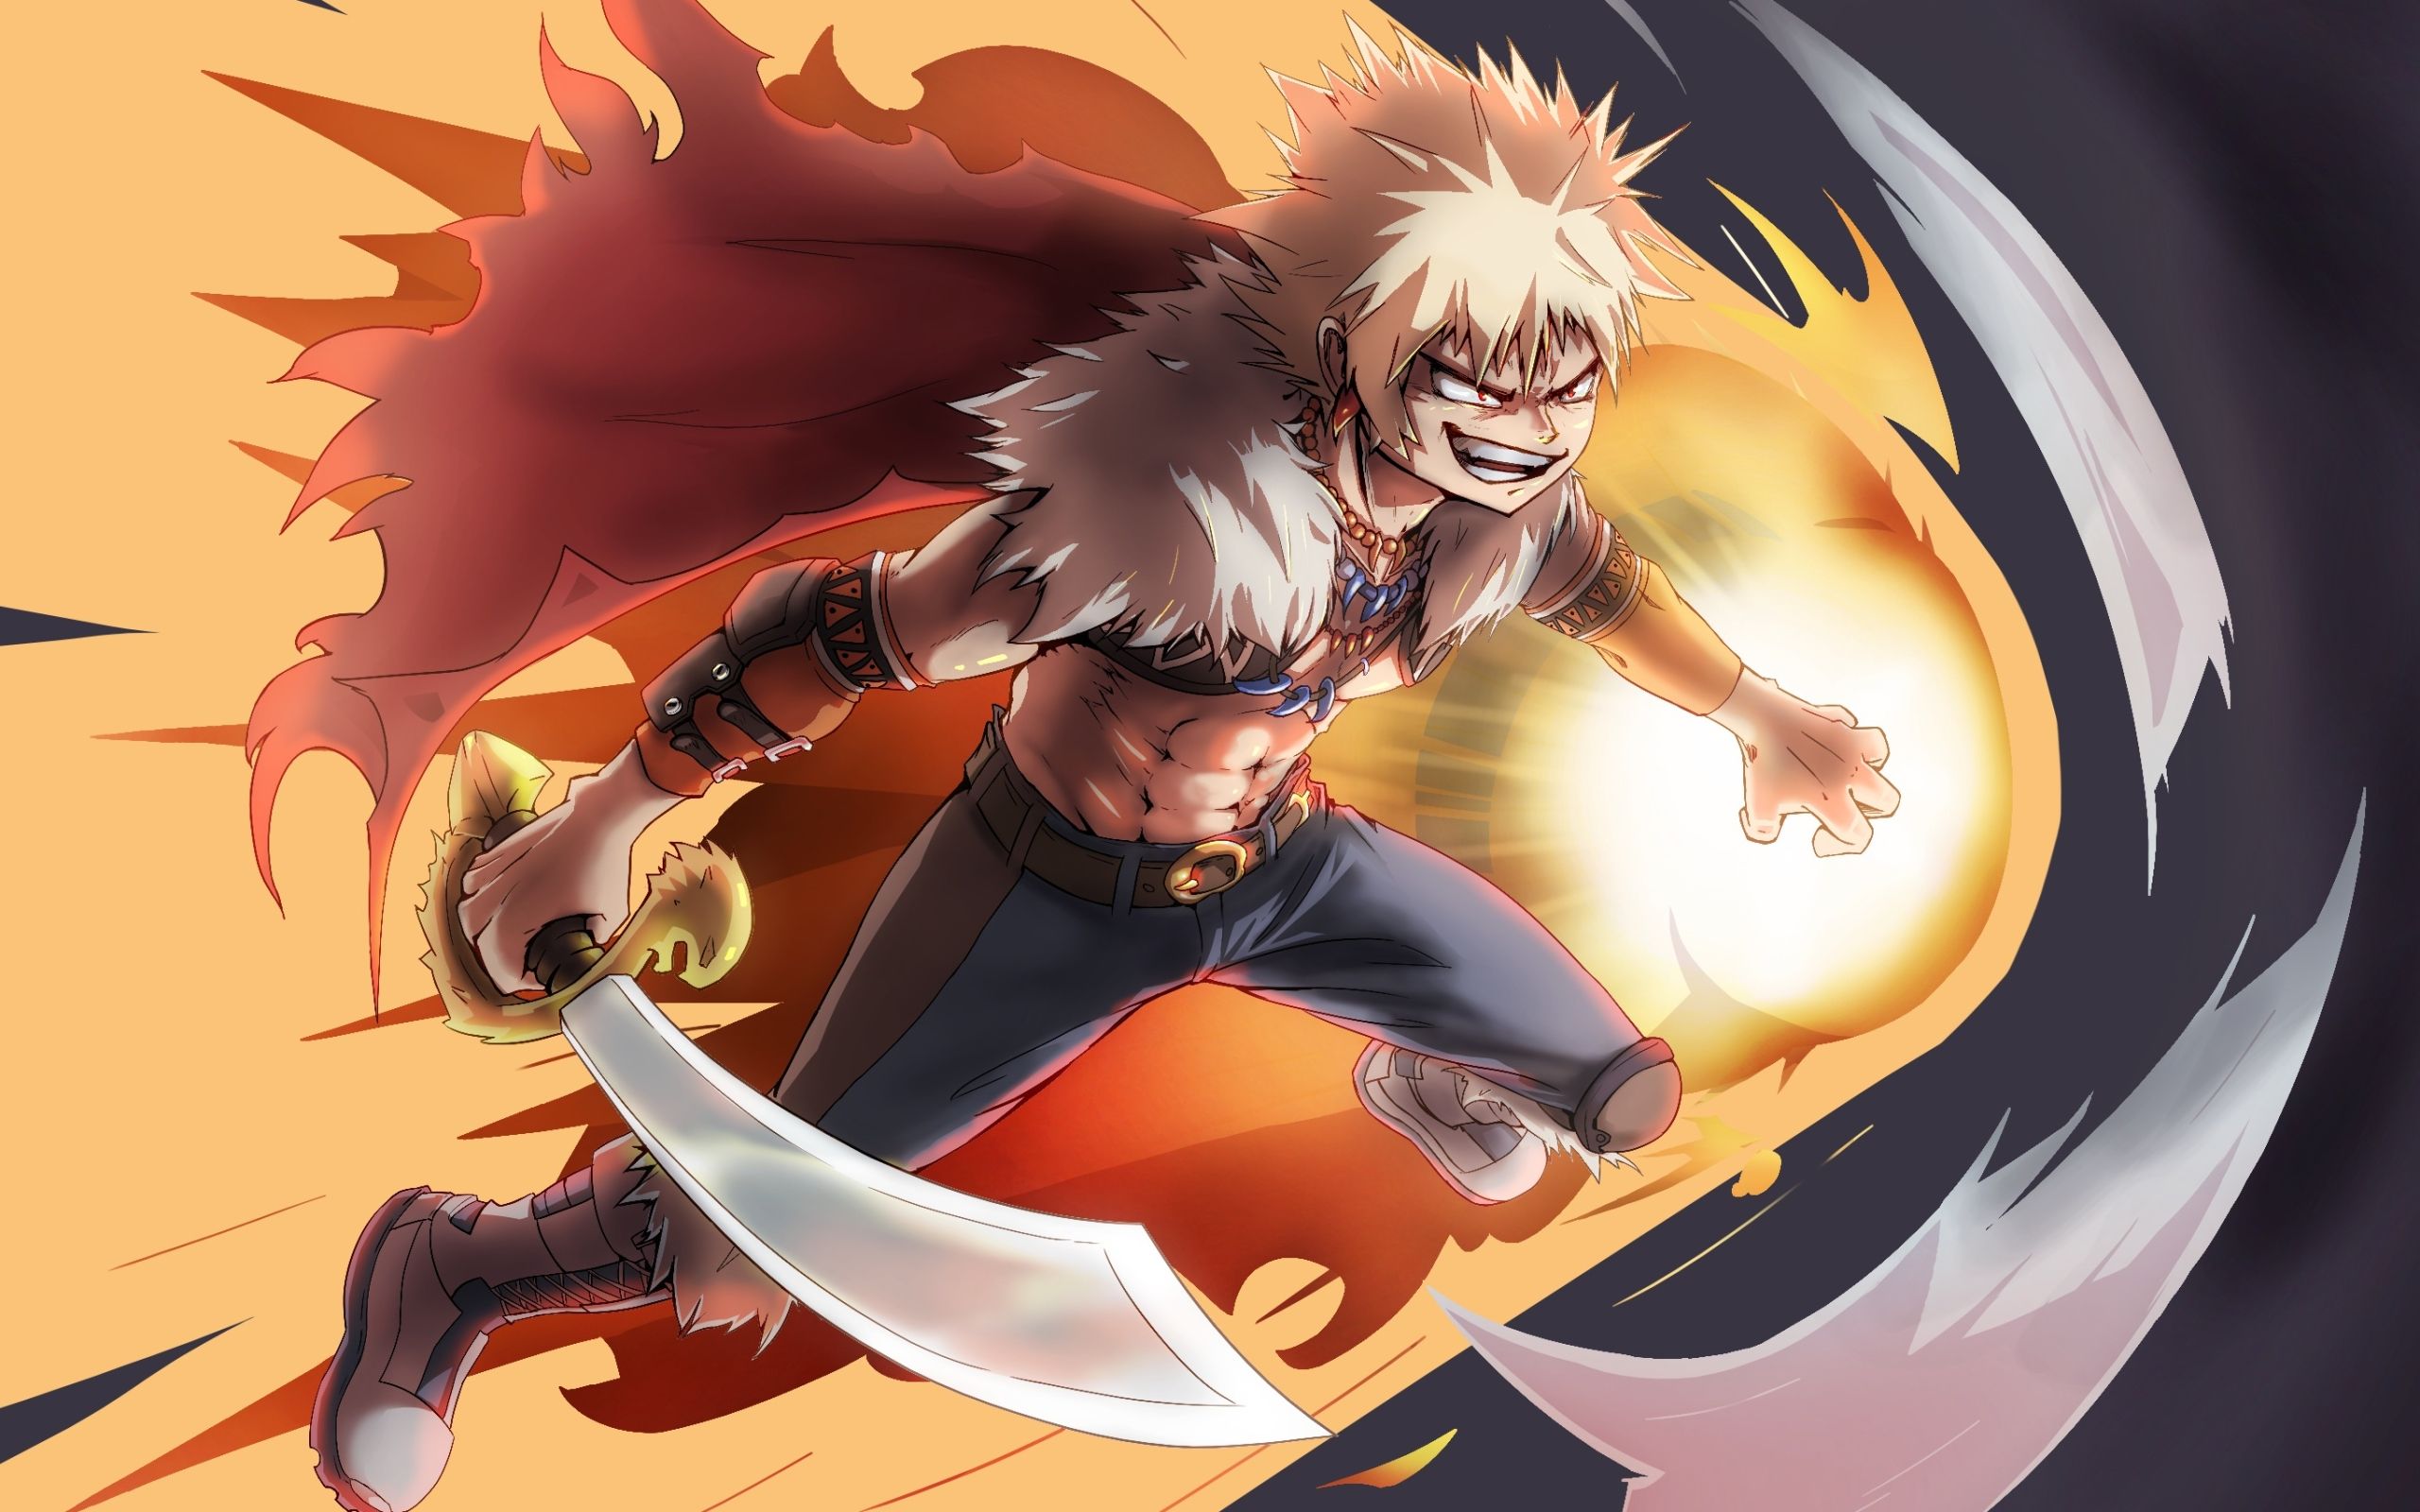 Bakugo Backgrounds posted by Ryan Simpson.